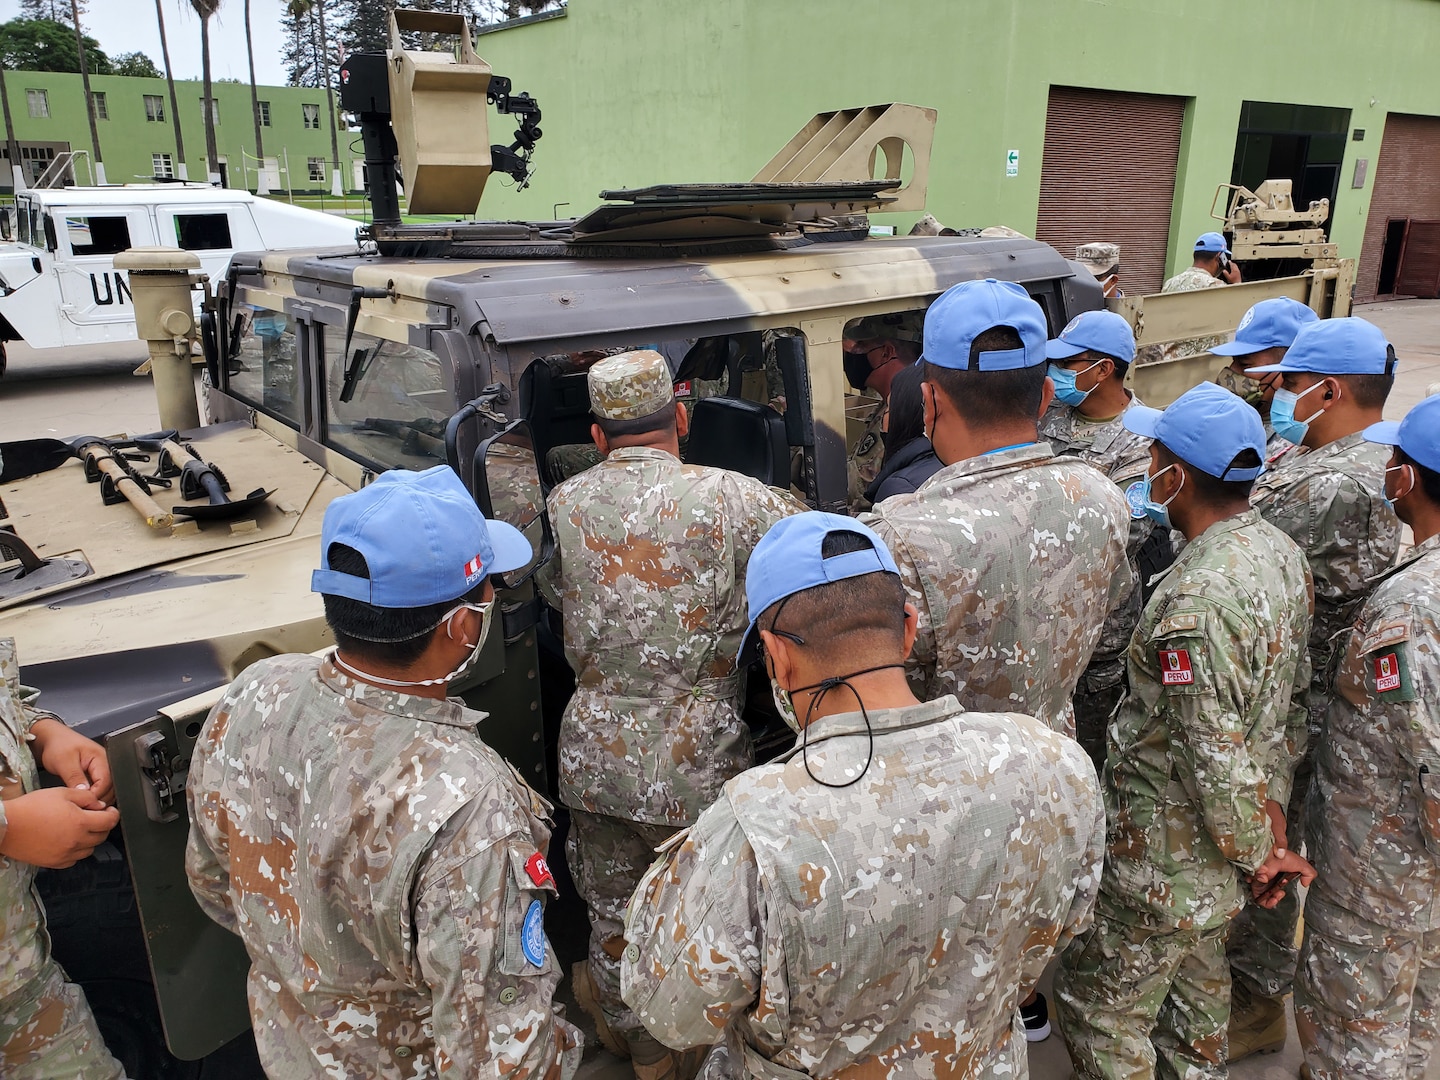 Members of the West Virginia National Guard provide Mechanics Mobile Training Team, Preventative Maintenance Checks and Services, and Driver’s Training to members of the Peruvian Armed Forces on the M1165 HMMWV (High Mobility Multipurpose Wheeled Vehicle), as a part of the National Guard's State Partnership Program in Lima, Peru, June 3, 2021. Peru will utilize the training on international peacekeeping missions as part of the United Nations Multidimensional Integrated Stabilization Mission in the Central African Republic, conducting missions as diverse as clearing terrain, airfield and heliport construction, equipment transportation and convoy operations including food and water supplies, communications, intelligence, as well as legal and medical operations. (Courtesy photo)